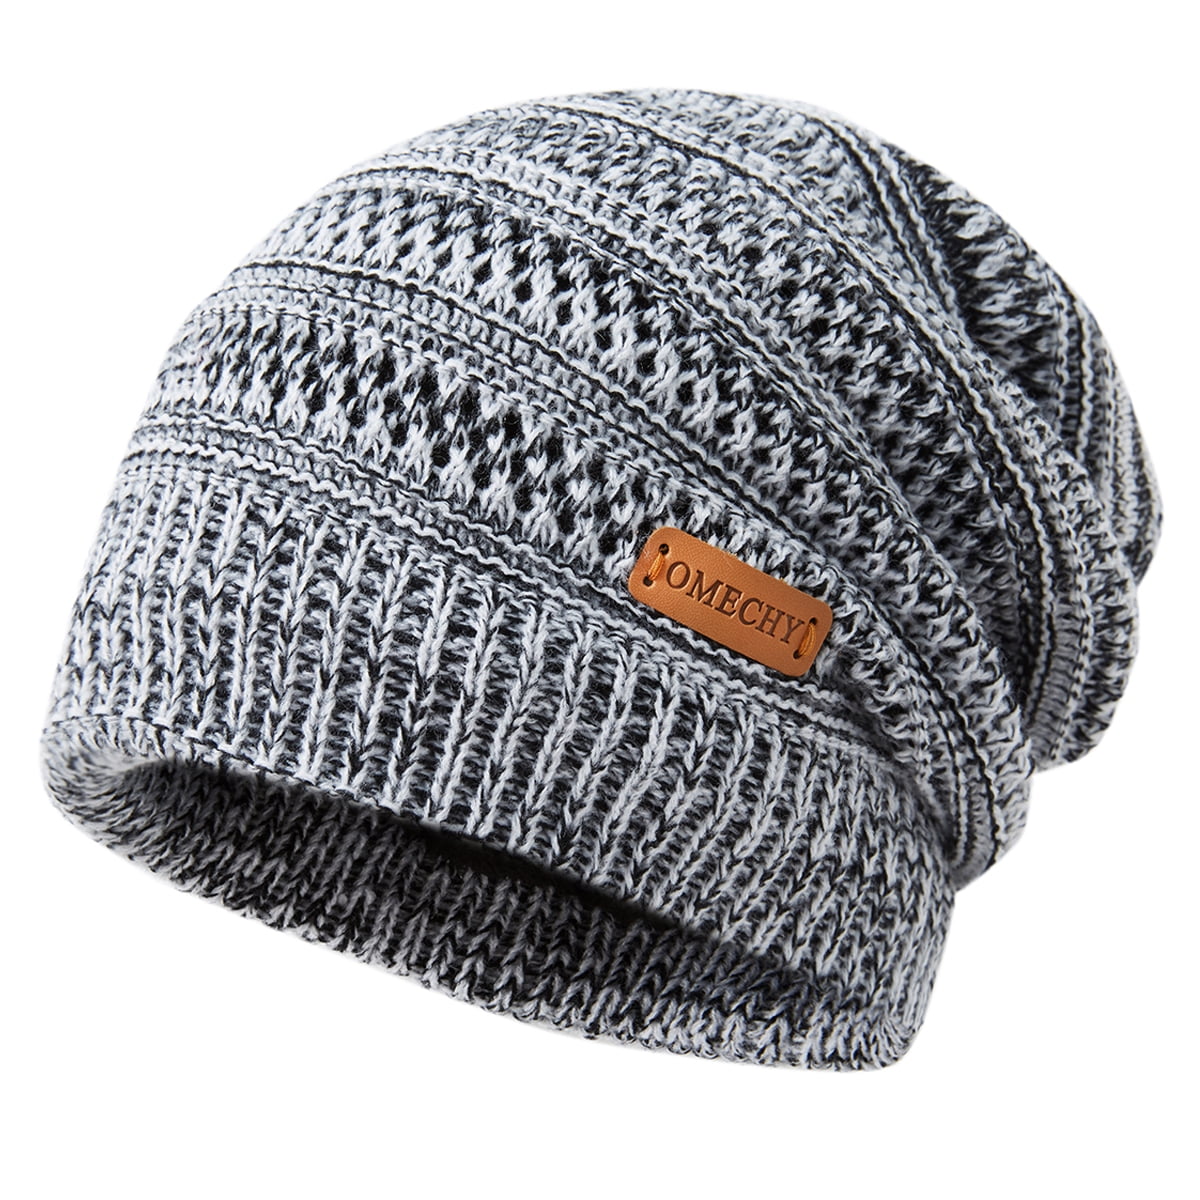 Slouchy Beanie Hats for Warm Winter Mens Beanie Cap Lined Knit Thick Hat （Gray Piece） - Walmart.com